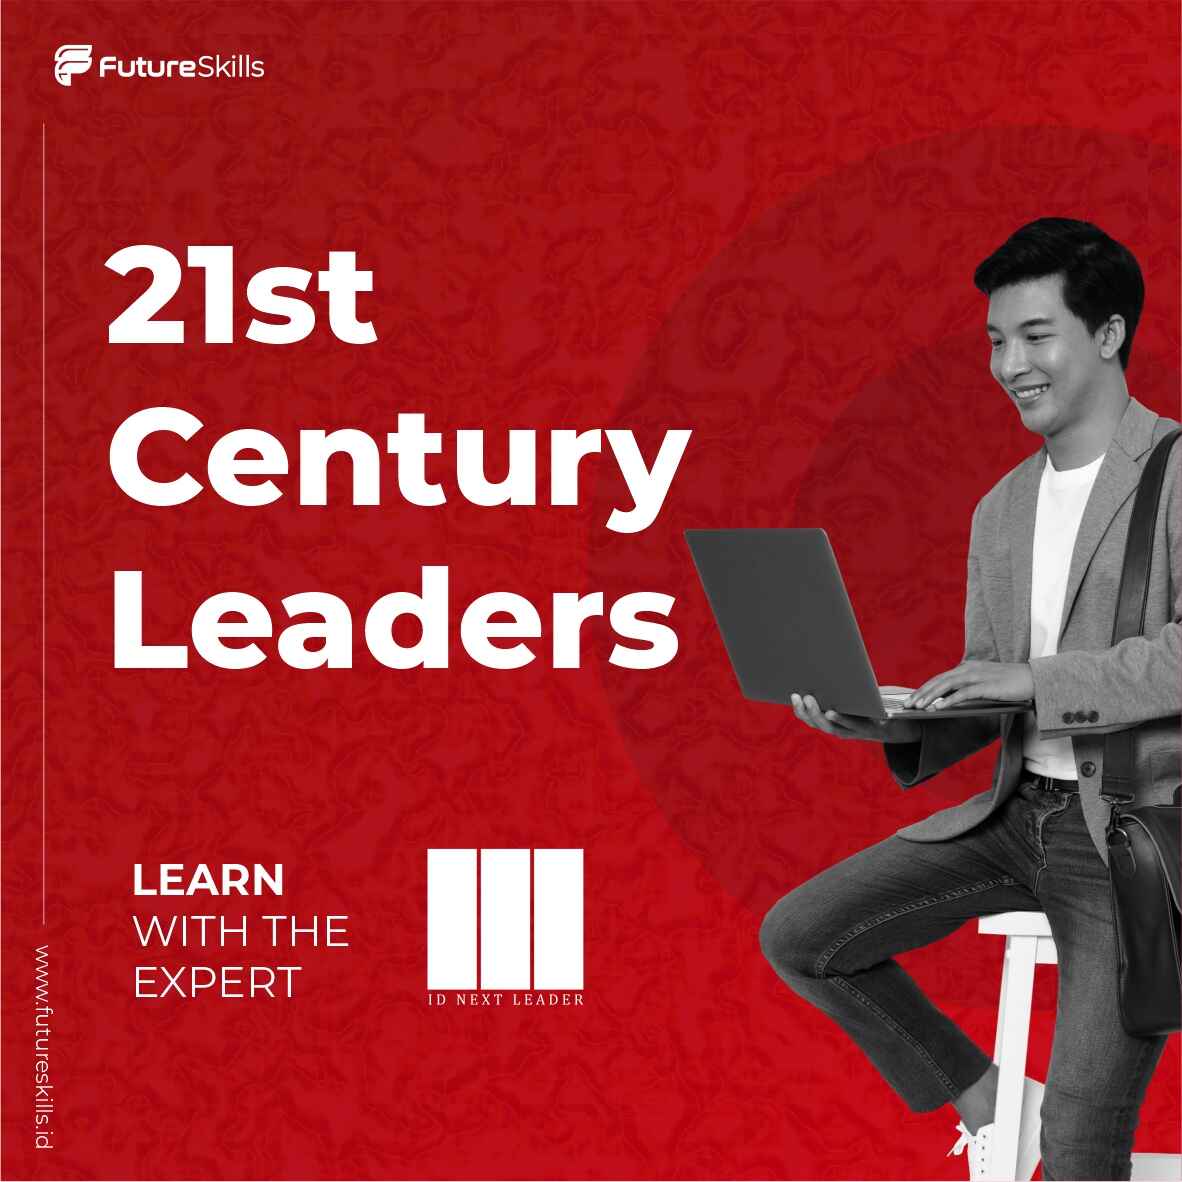 21st Century Leaders by ID Next Leader